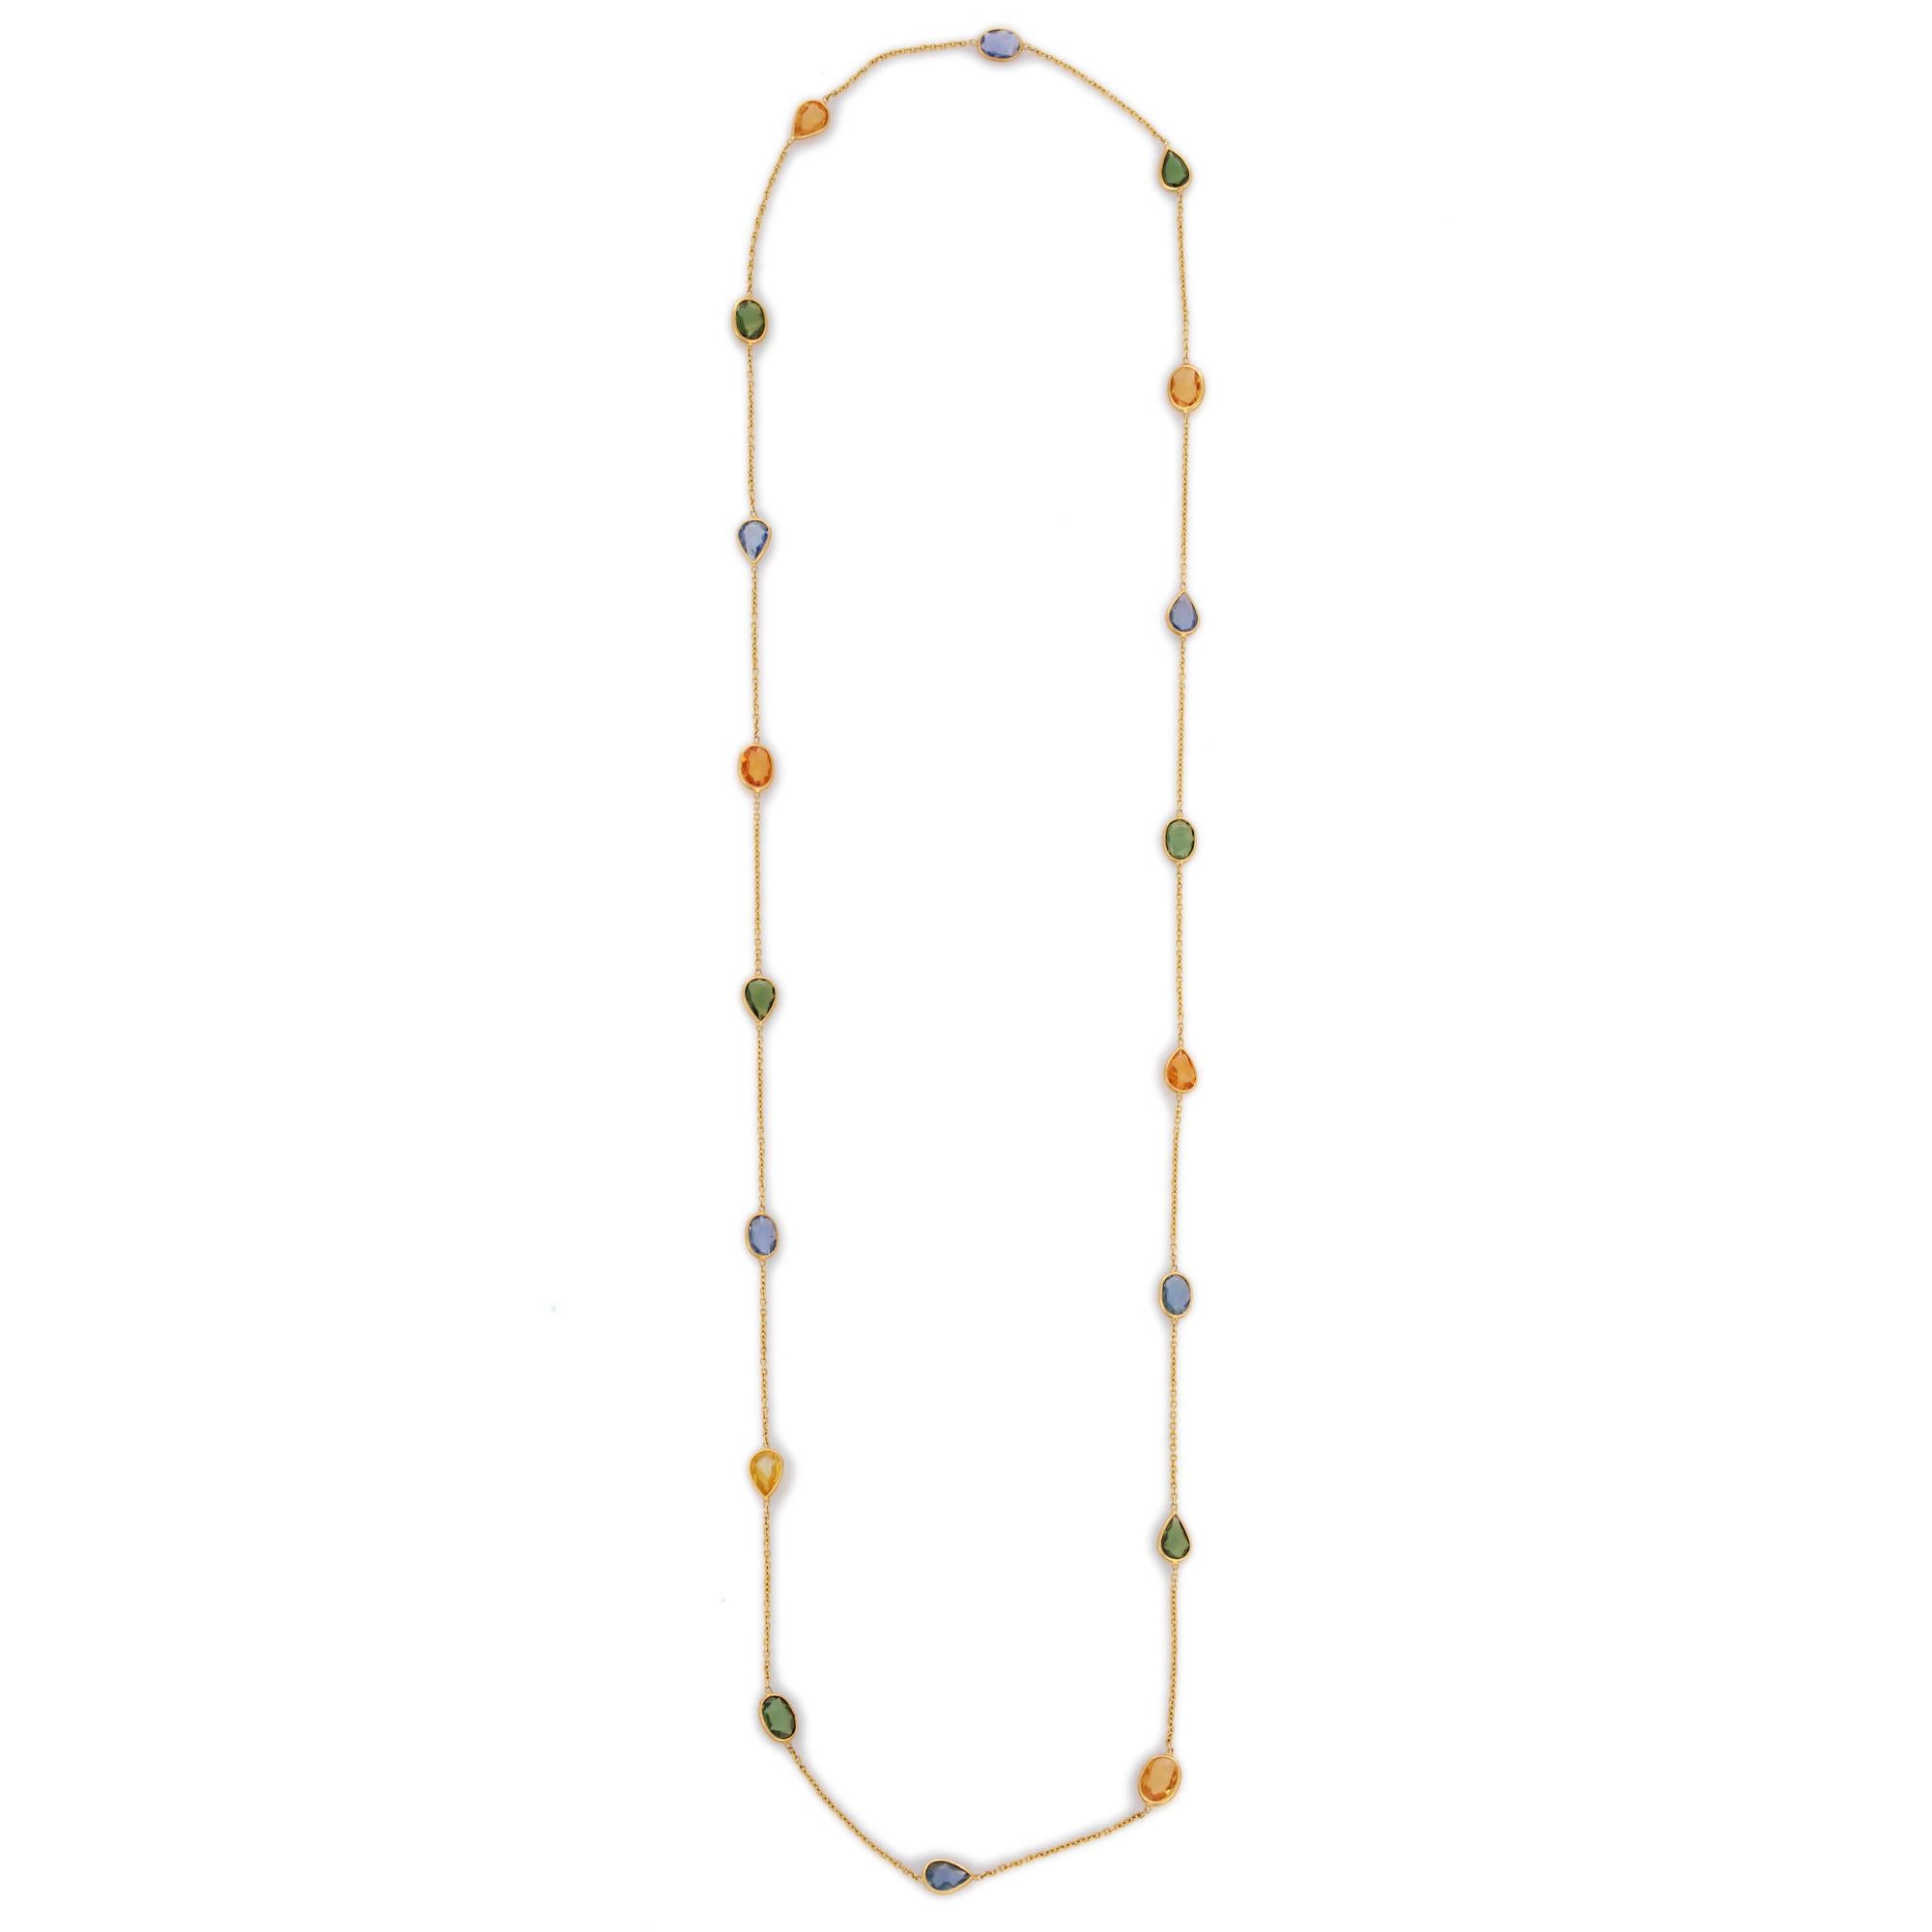 Modernist 12.16 Ct Multi Sapphire Chain Necklace in 18K Yellow Gold In New Condition For Sale In Houston, TX